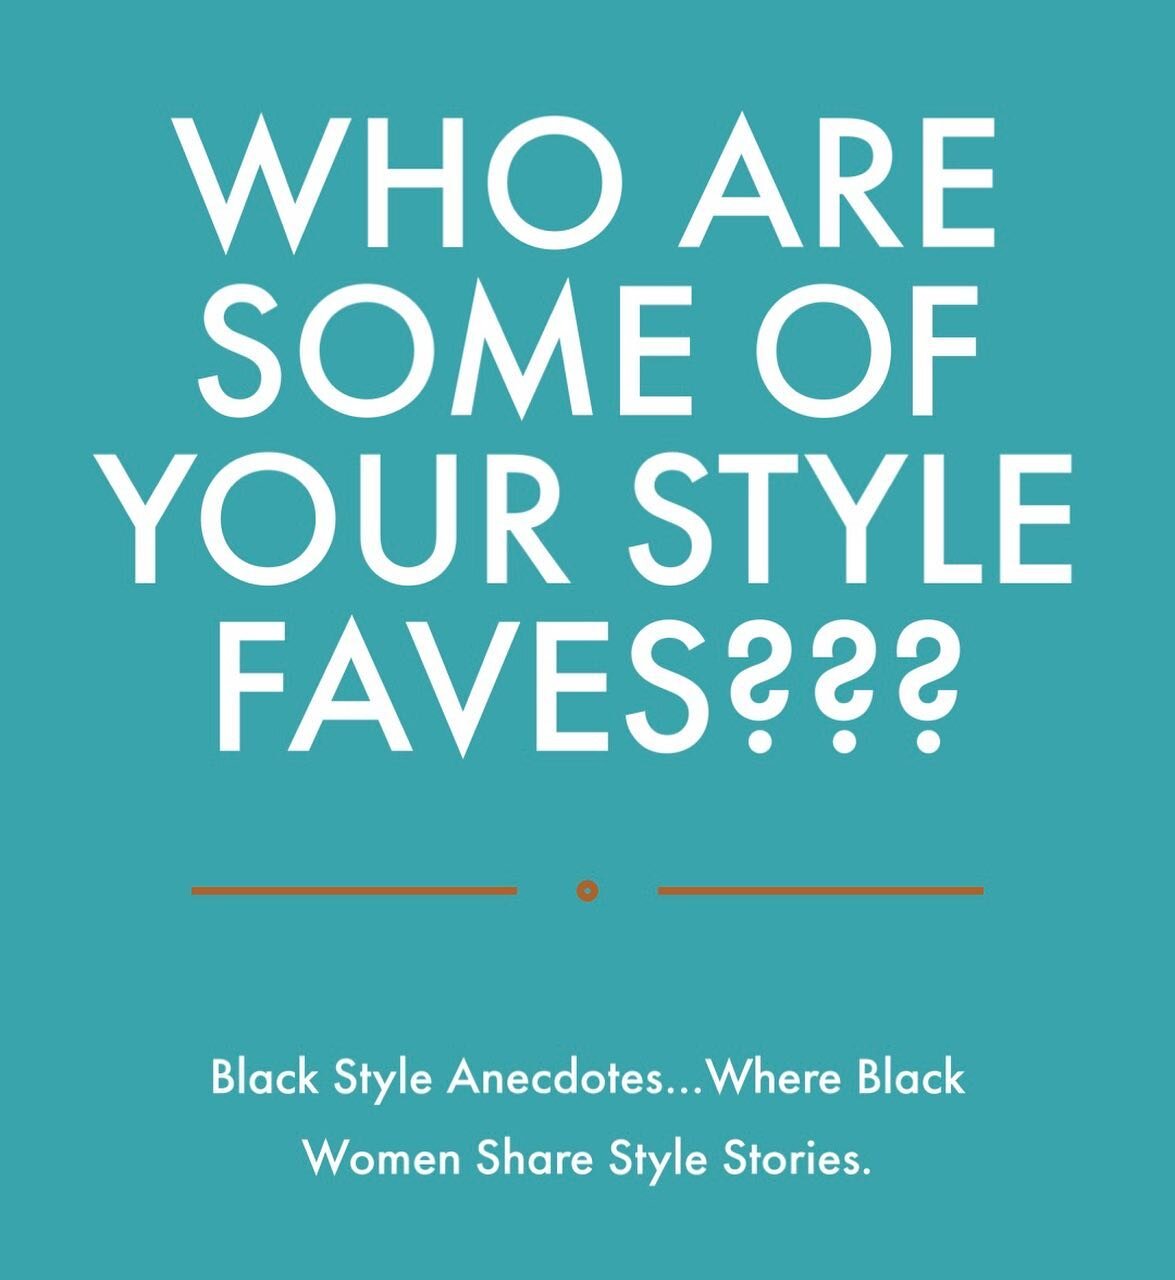 I&rsquo;m always looking for stylish Black women to follow and potentially have as a Black Style Anecdotes podcast guest, so let me know your faves in the comments! They just might be a part of season 10. 🤎

While I&rsquo;m on a break between season